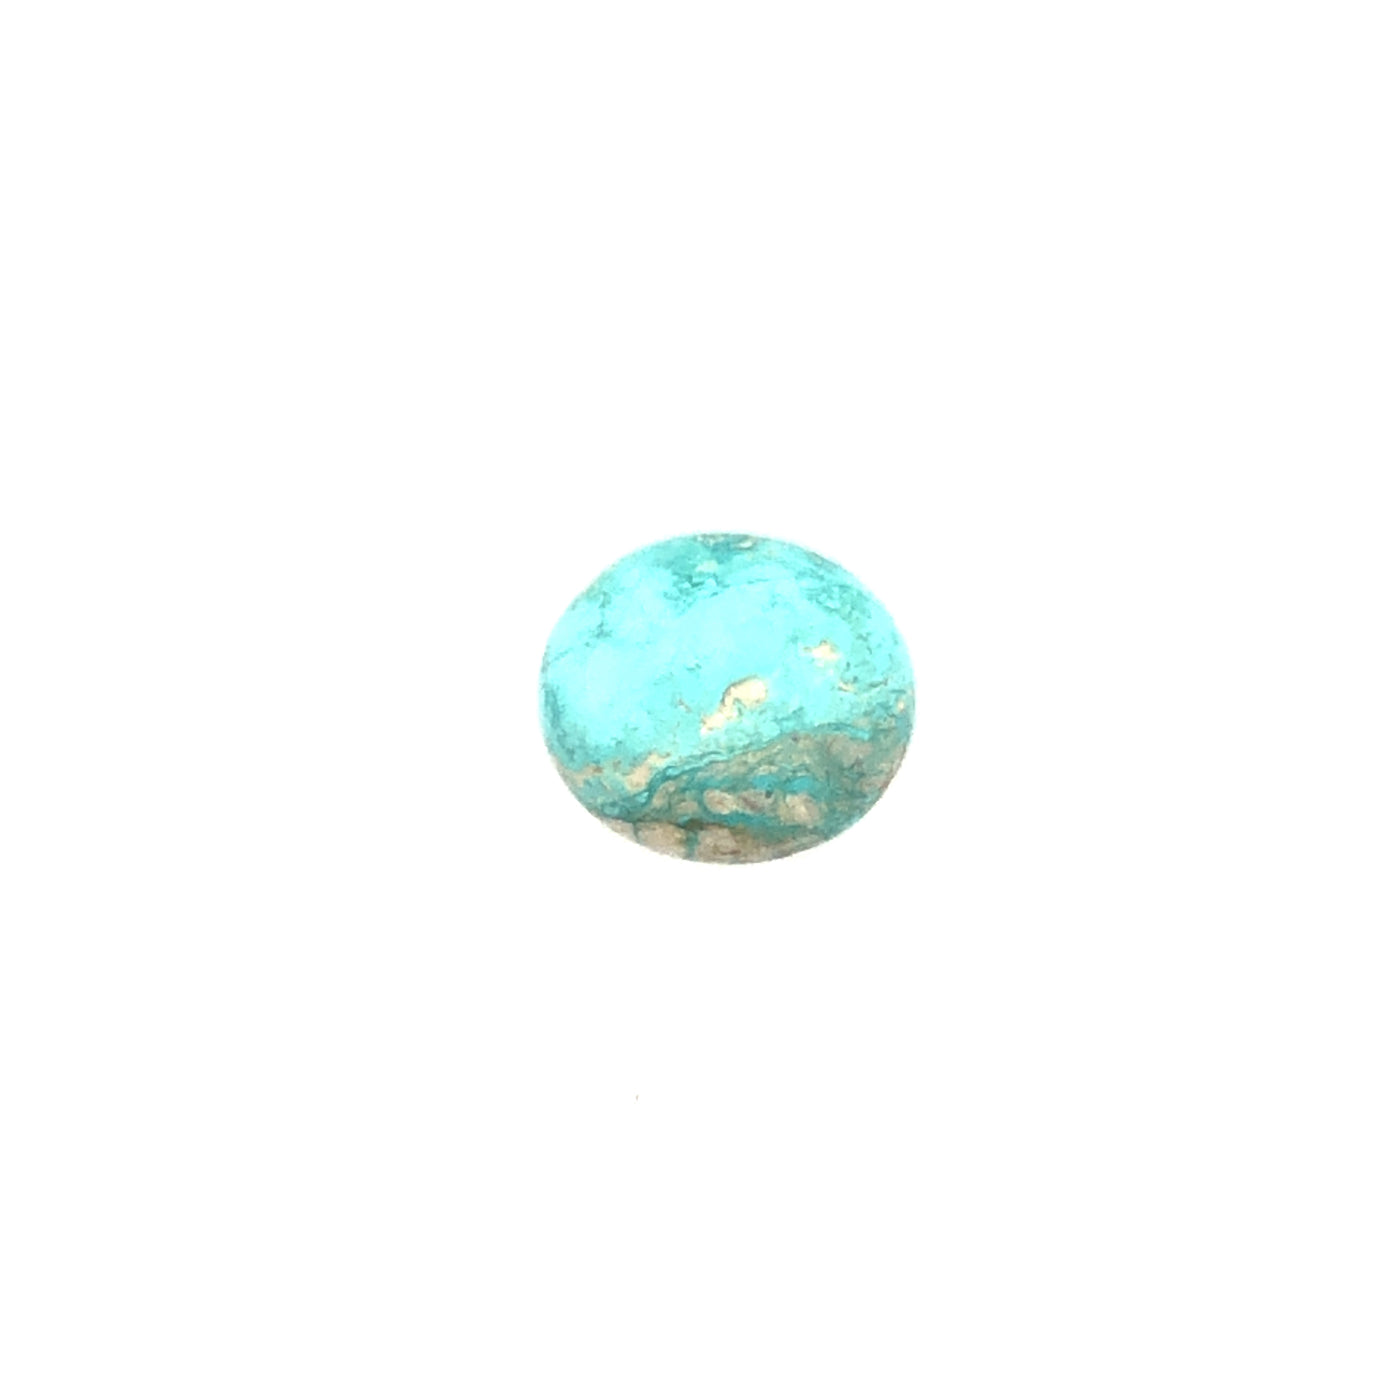 Loose Narooma Turquoise Oval Shaped 11.55Ct Blue With Some White